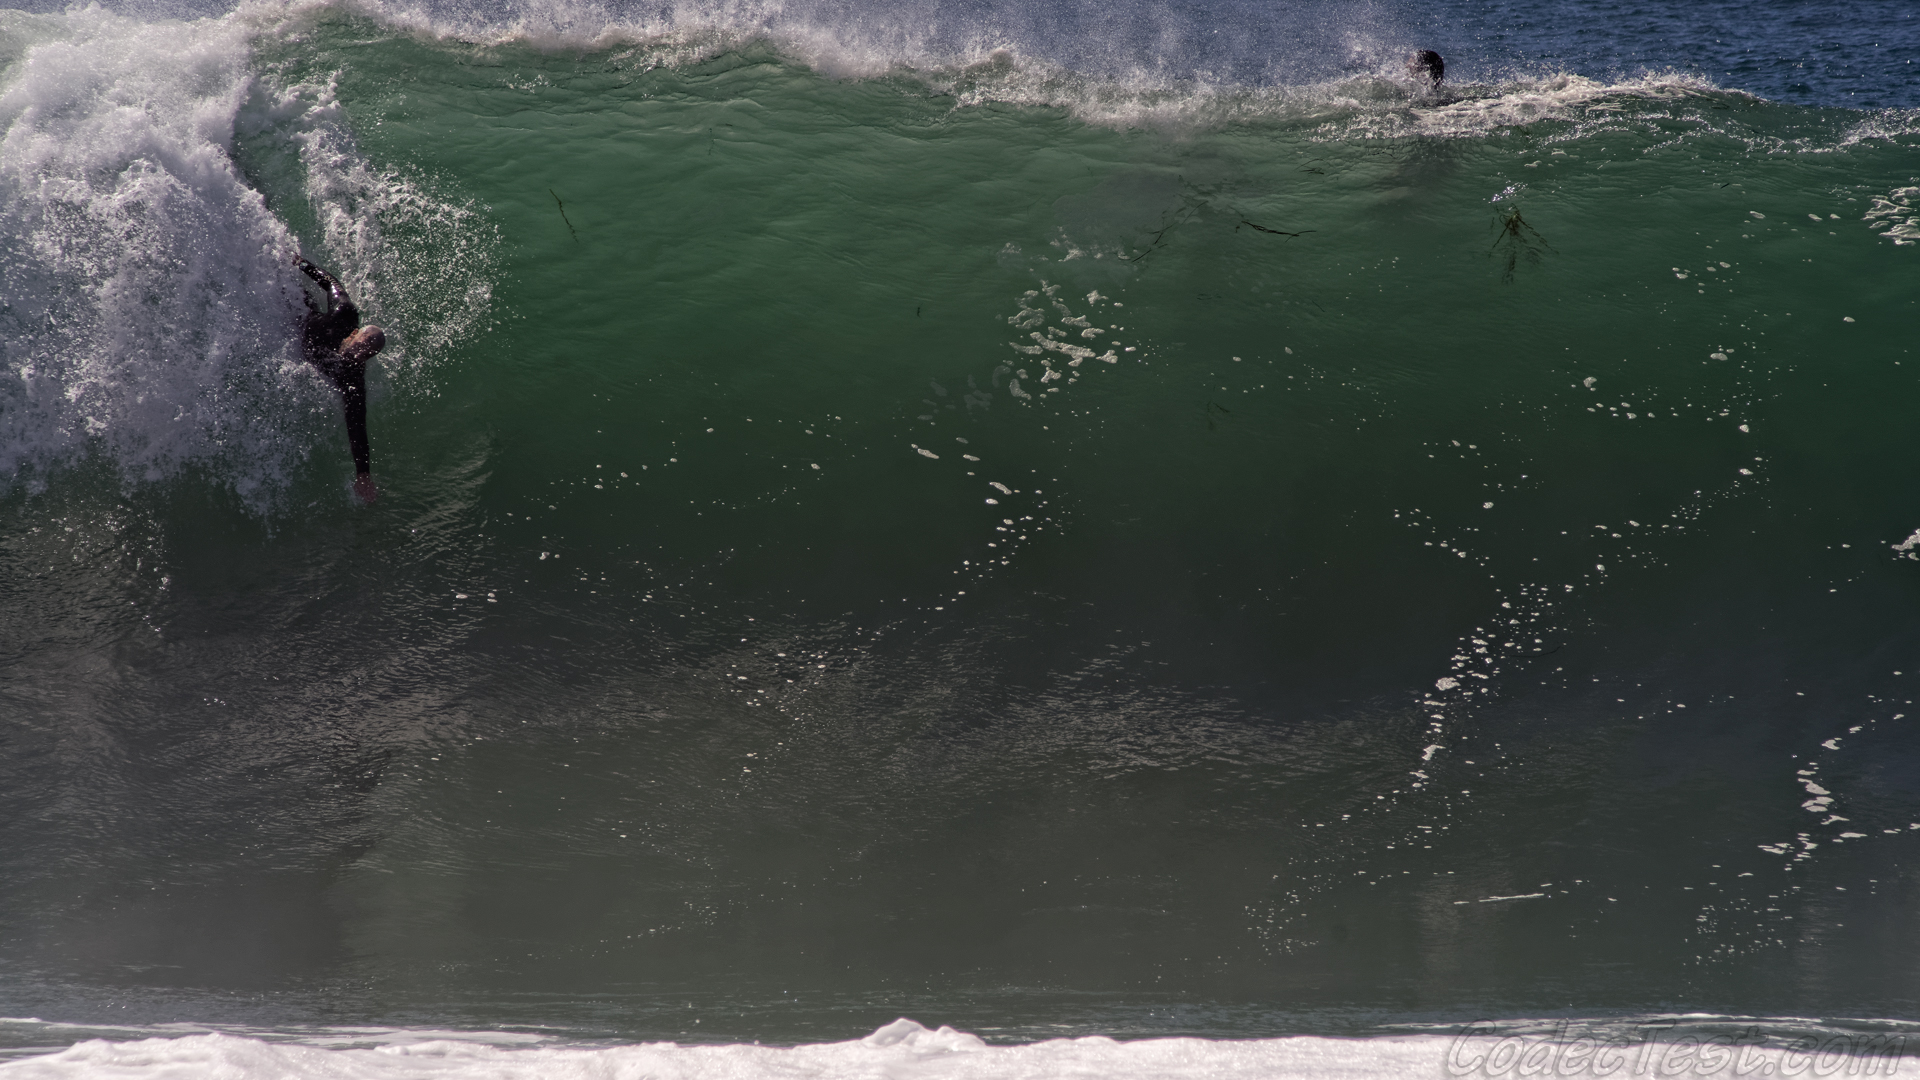 Surfing And Body Surfing Big Waves At The Wedge Newport Beach Hurricane